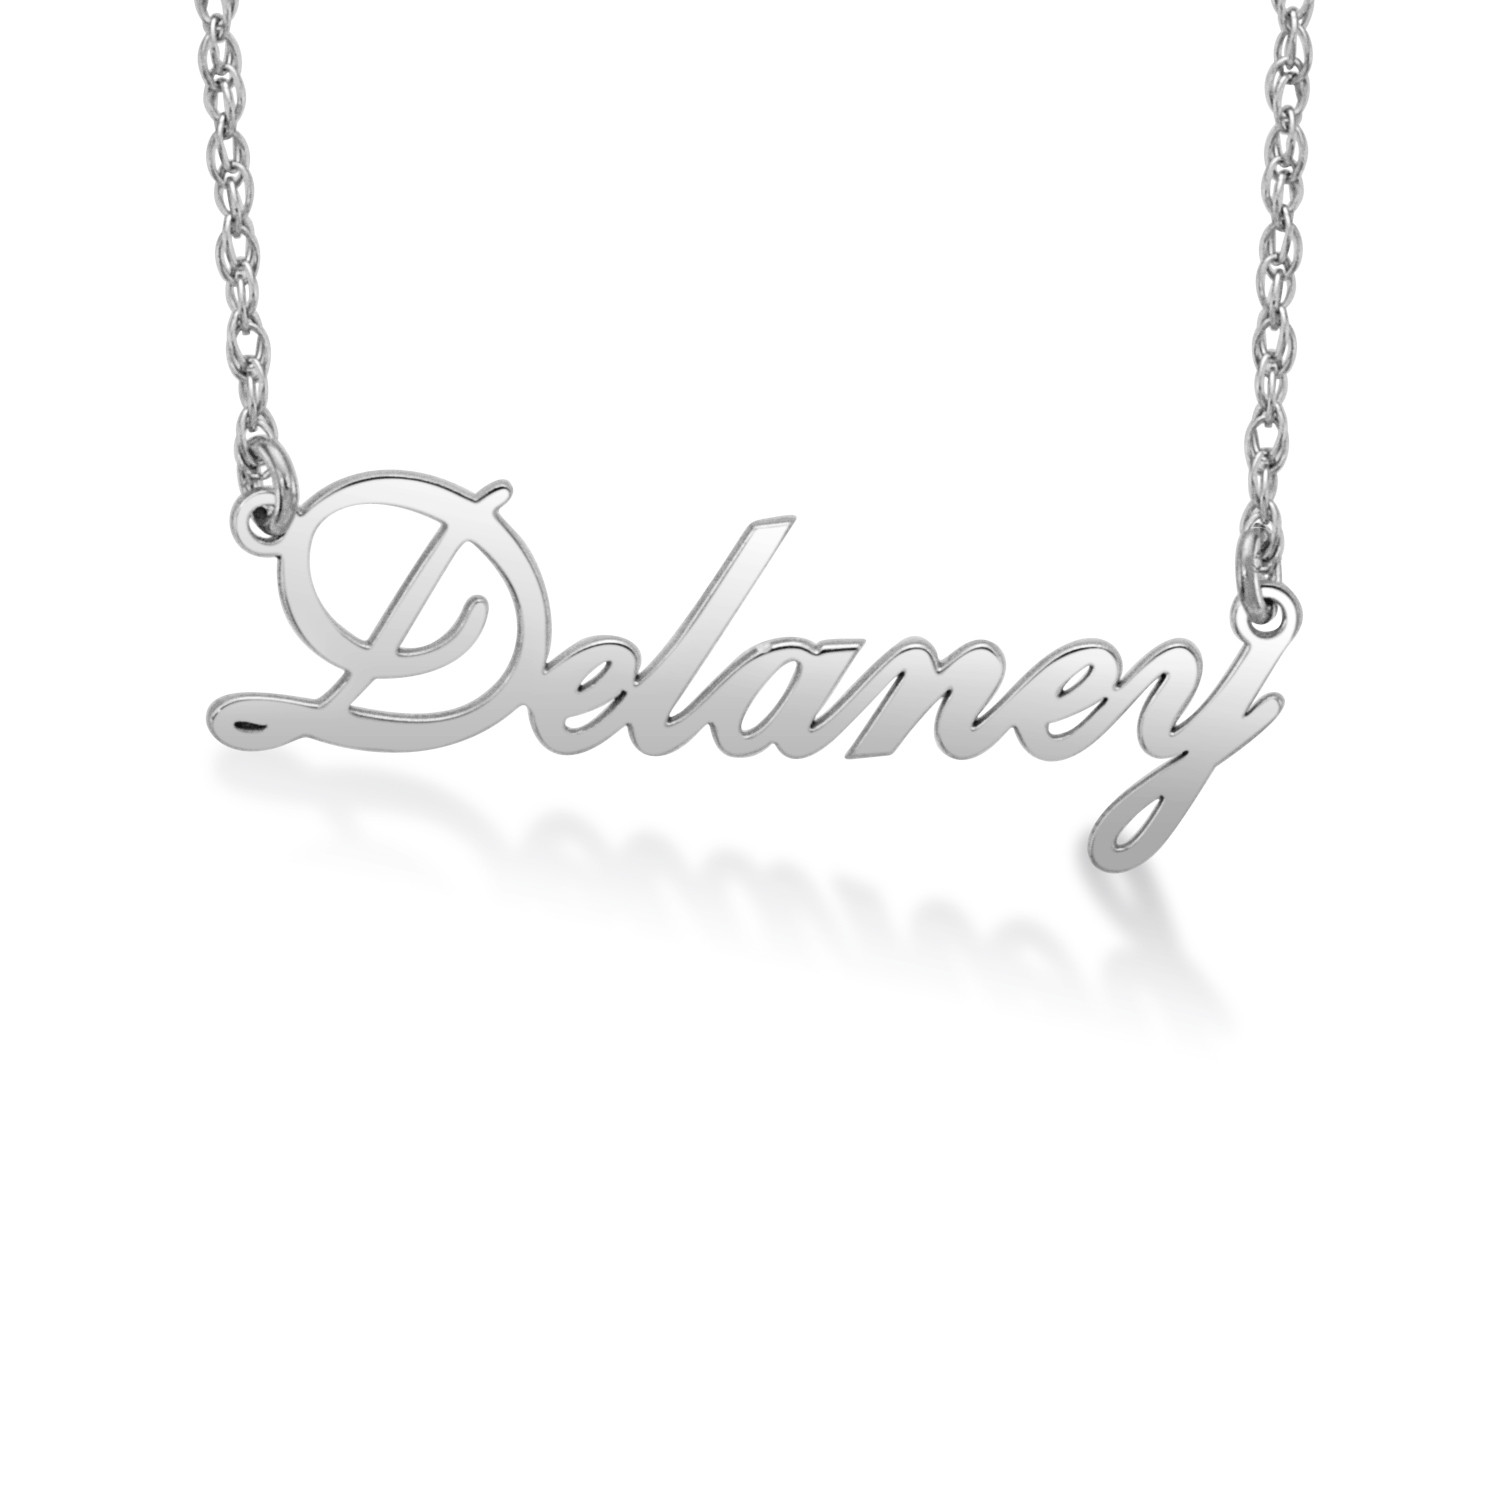 8 letters Personalised Name Necklace Customised Name With Silver Chain 